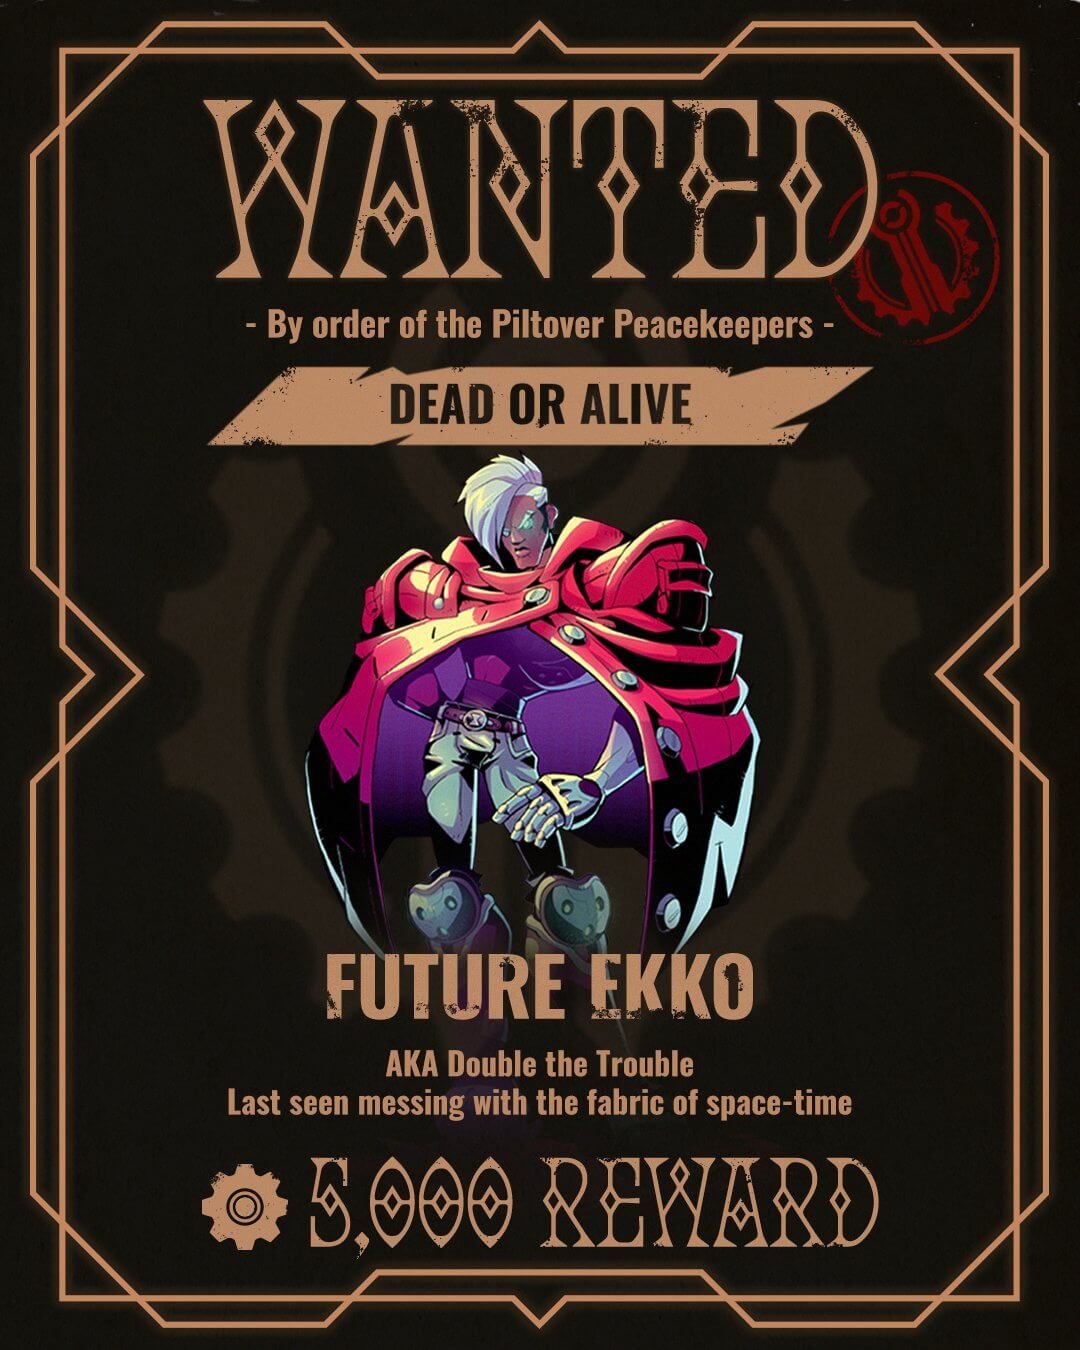 Wanted (Dead or Alive) Posted of Future Ekko, AKA the Double the Trouble